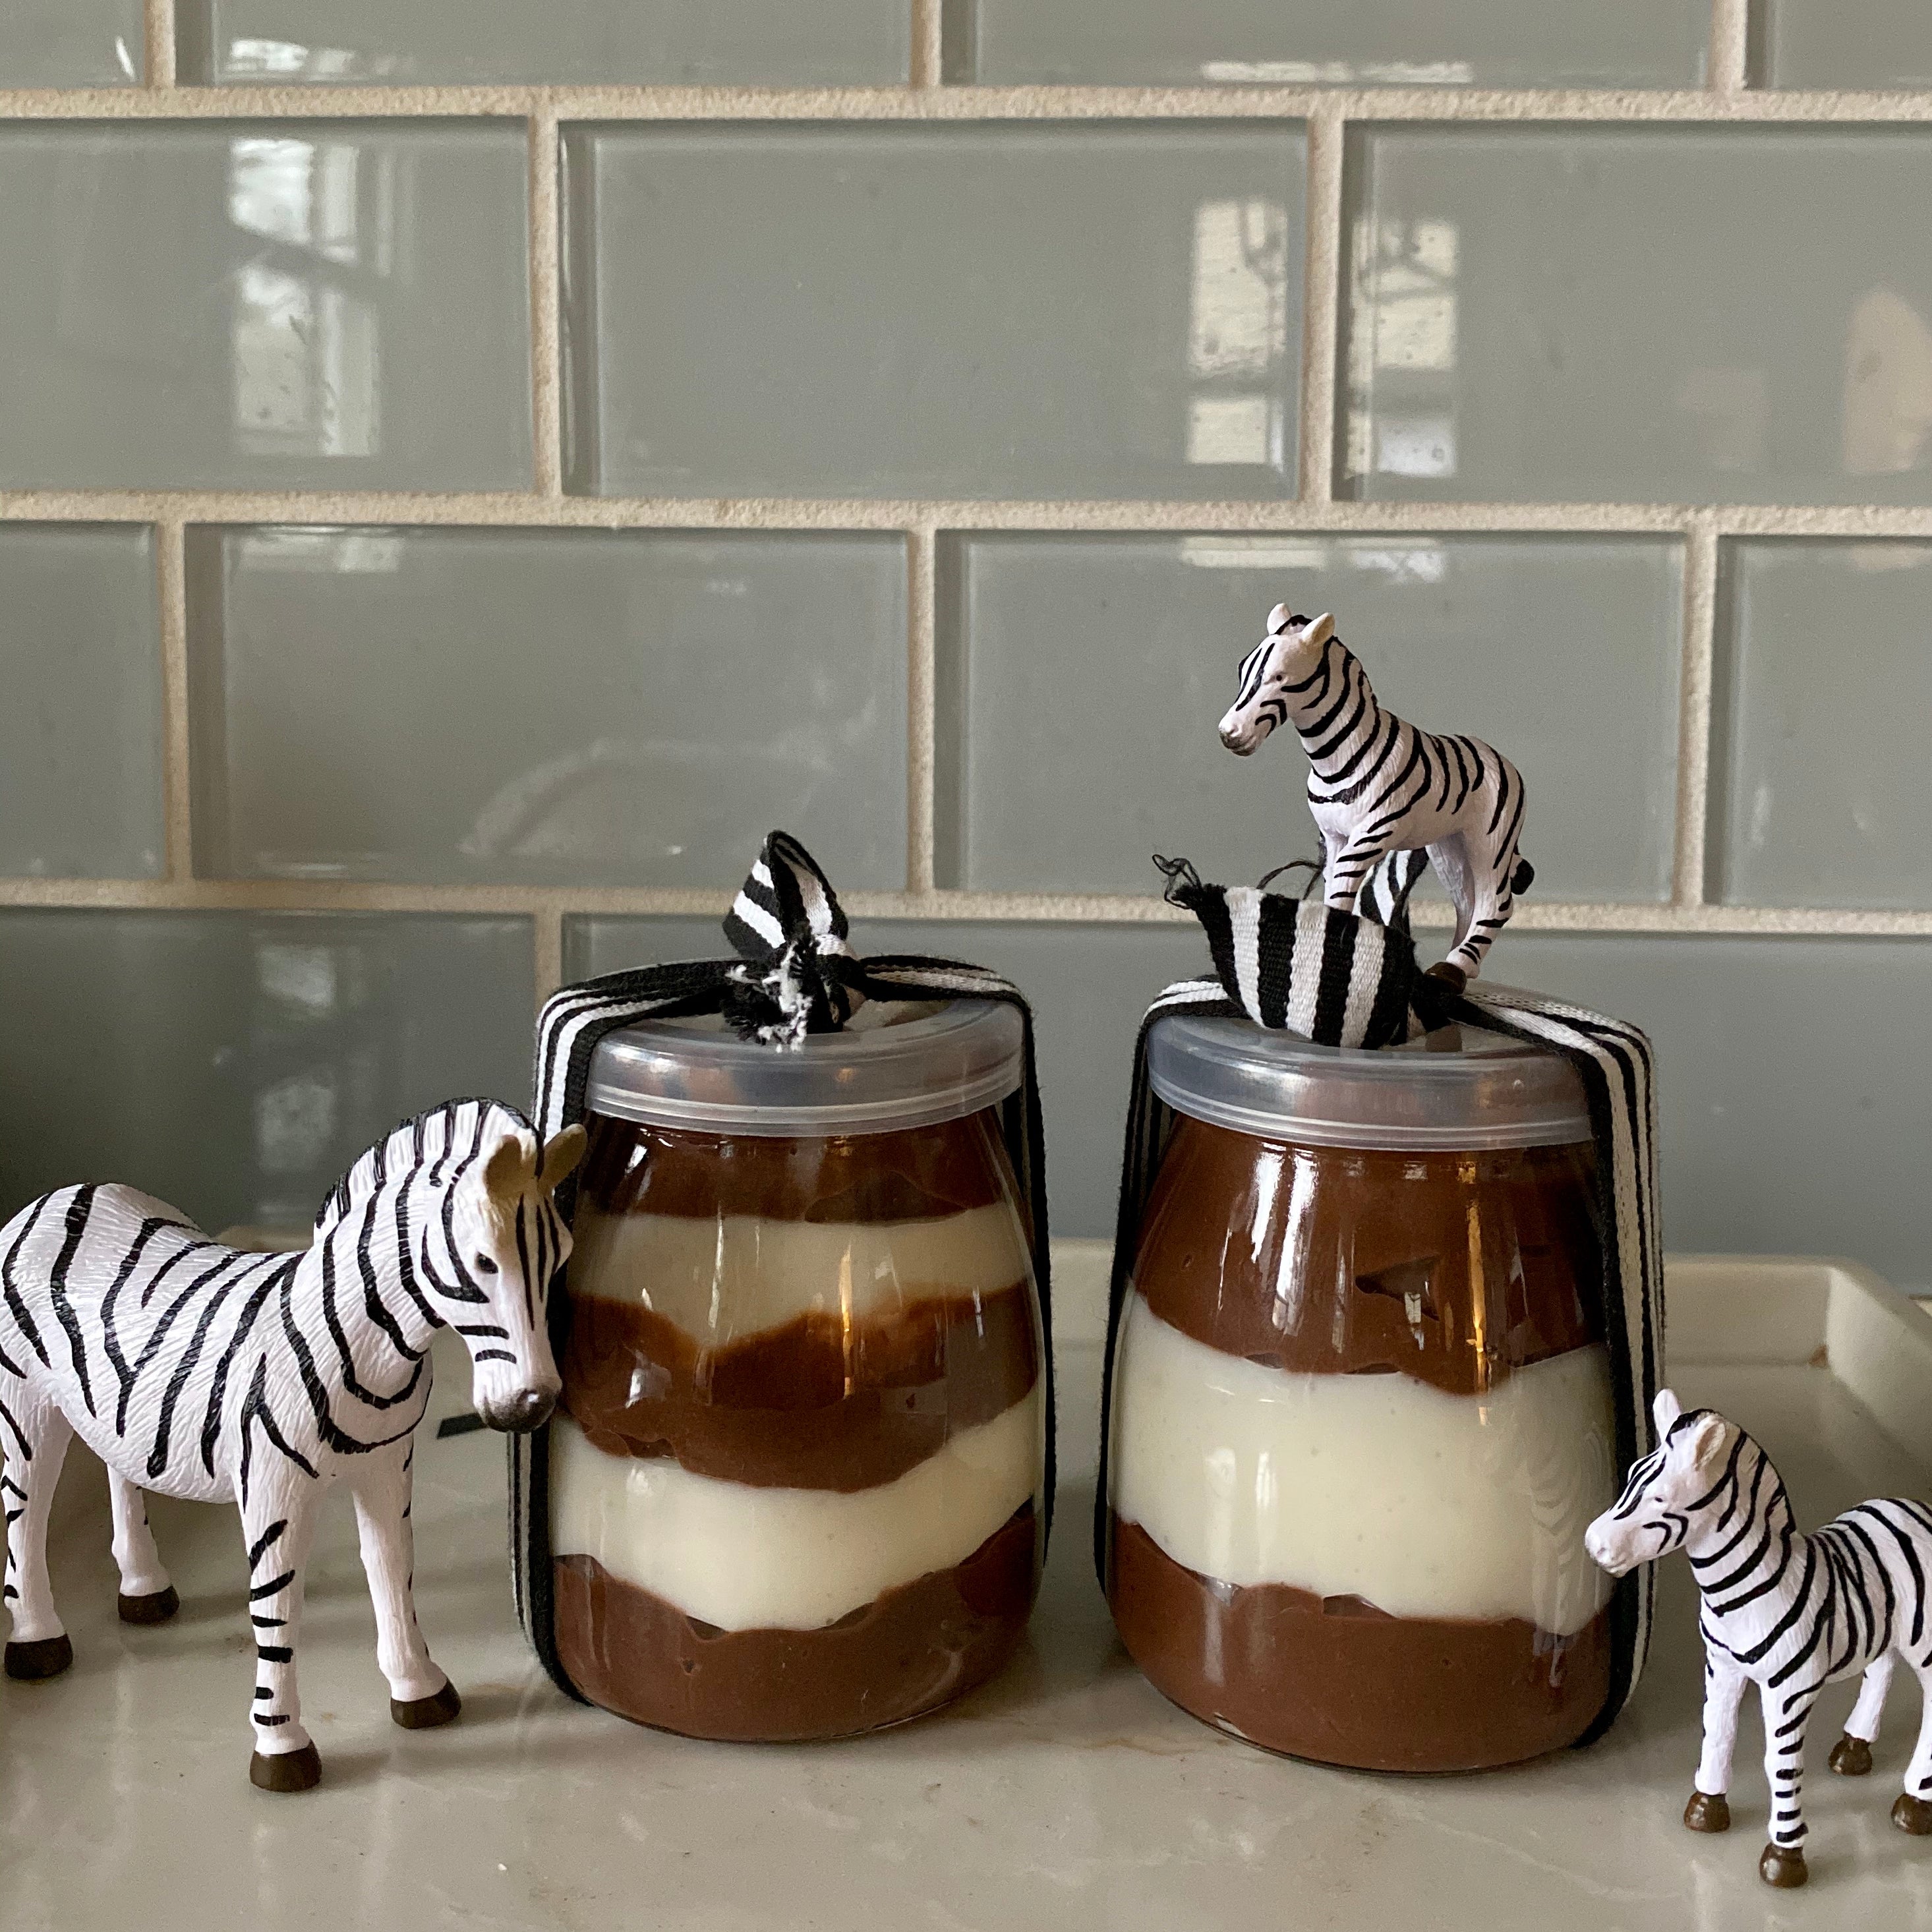 DIY Zebra Puddings for your Animal Lover Party